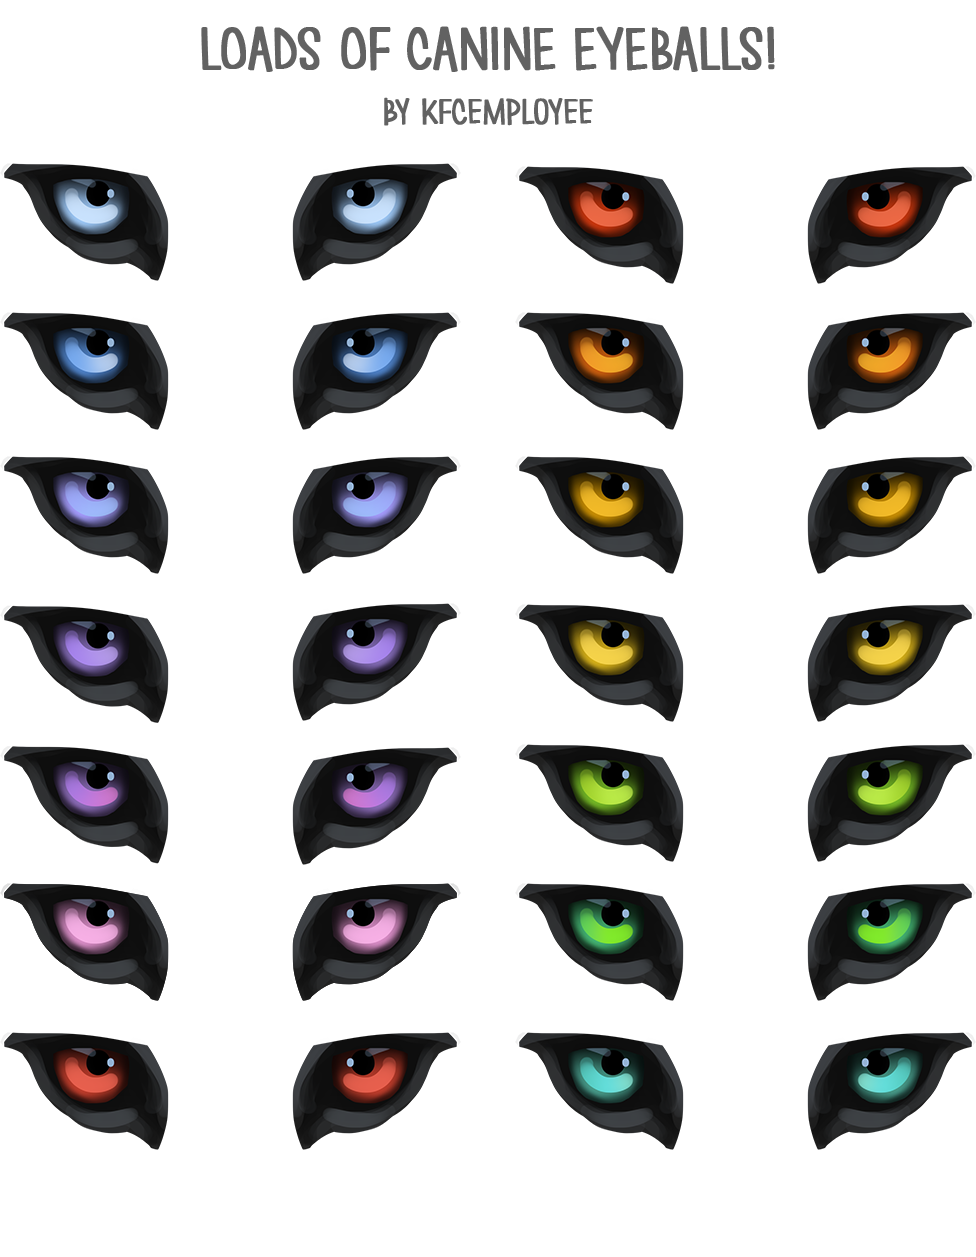 FREE Canine or wolf eyes PNG and PSD! by KFCemployee on DeviantArt.